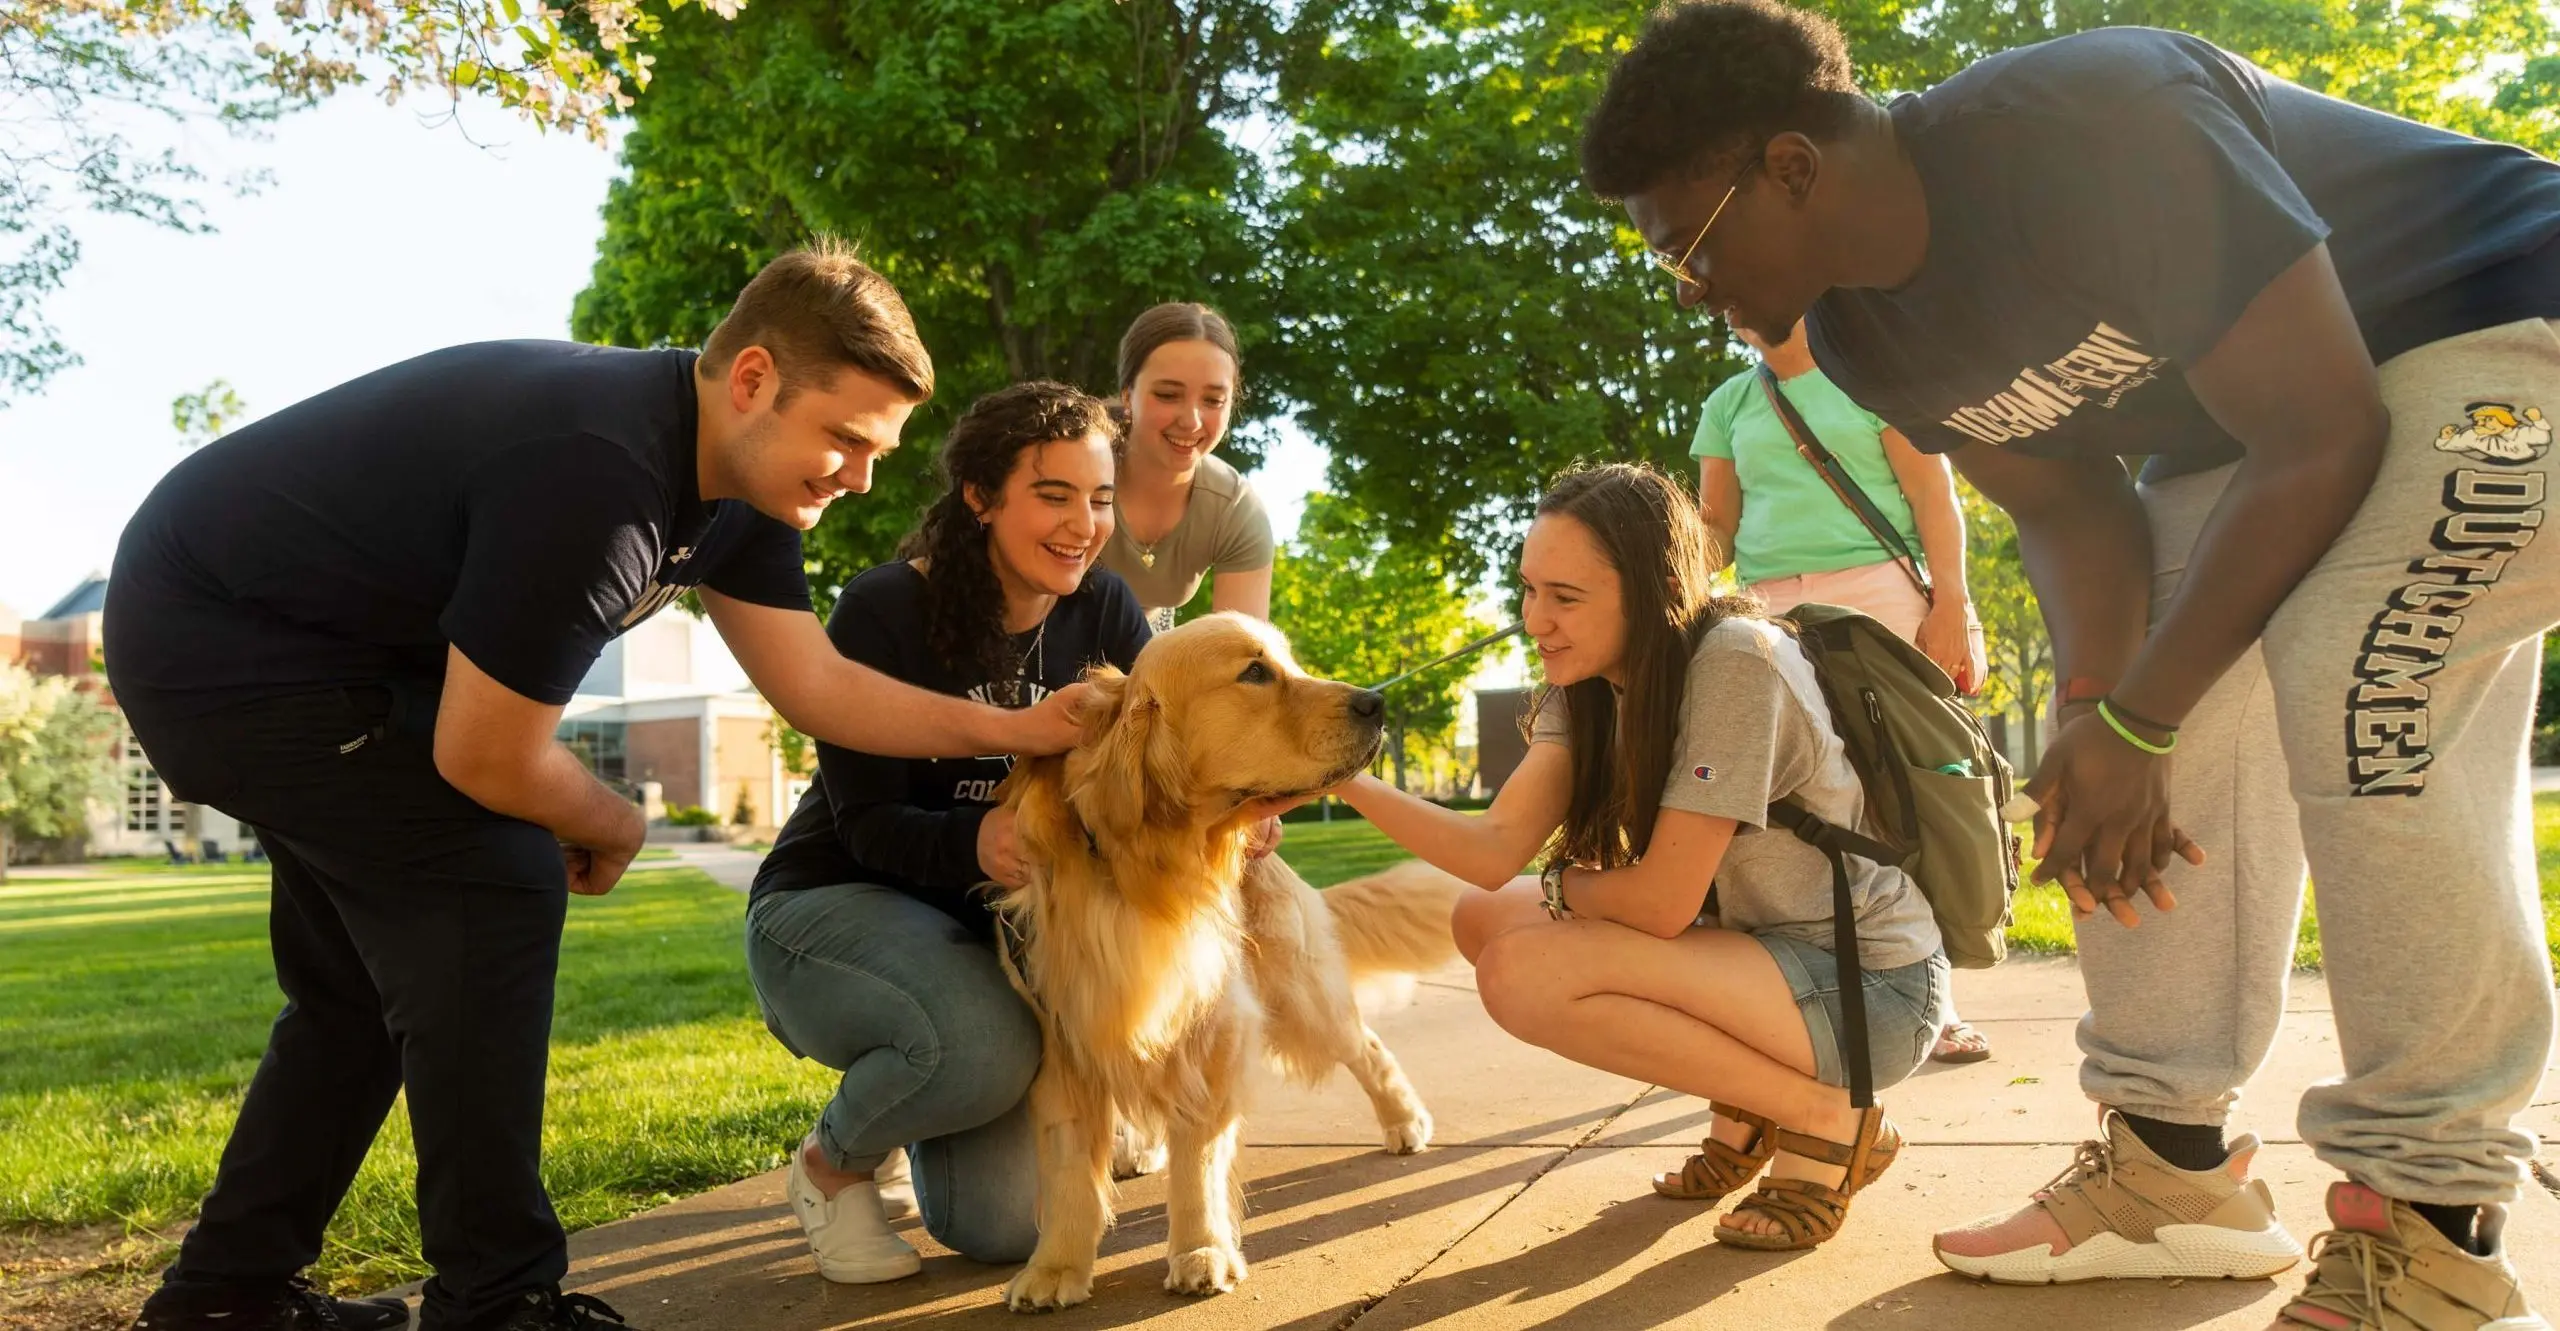 Students petting golden retriever on campus